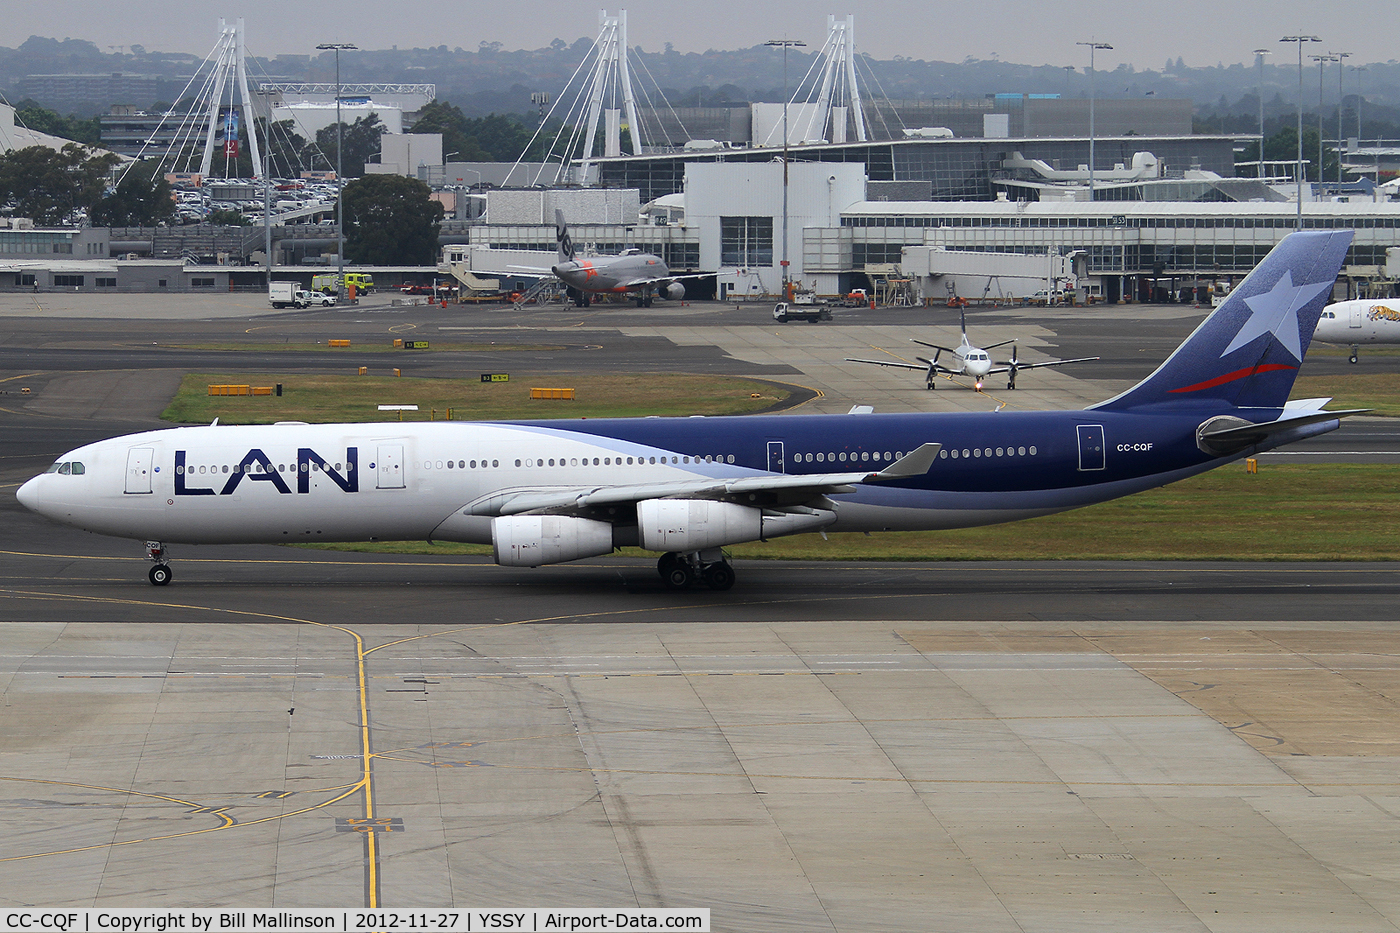 CC-CQF, 2001 Airbus A340-313X C/N 442, taxiing to 16R